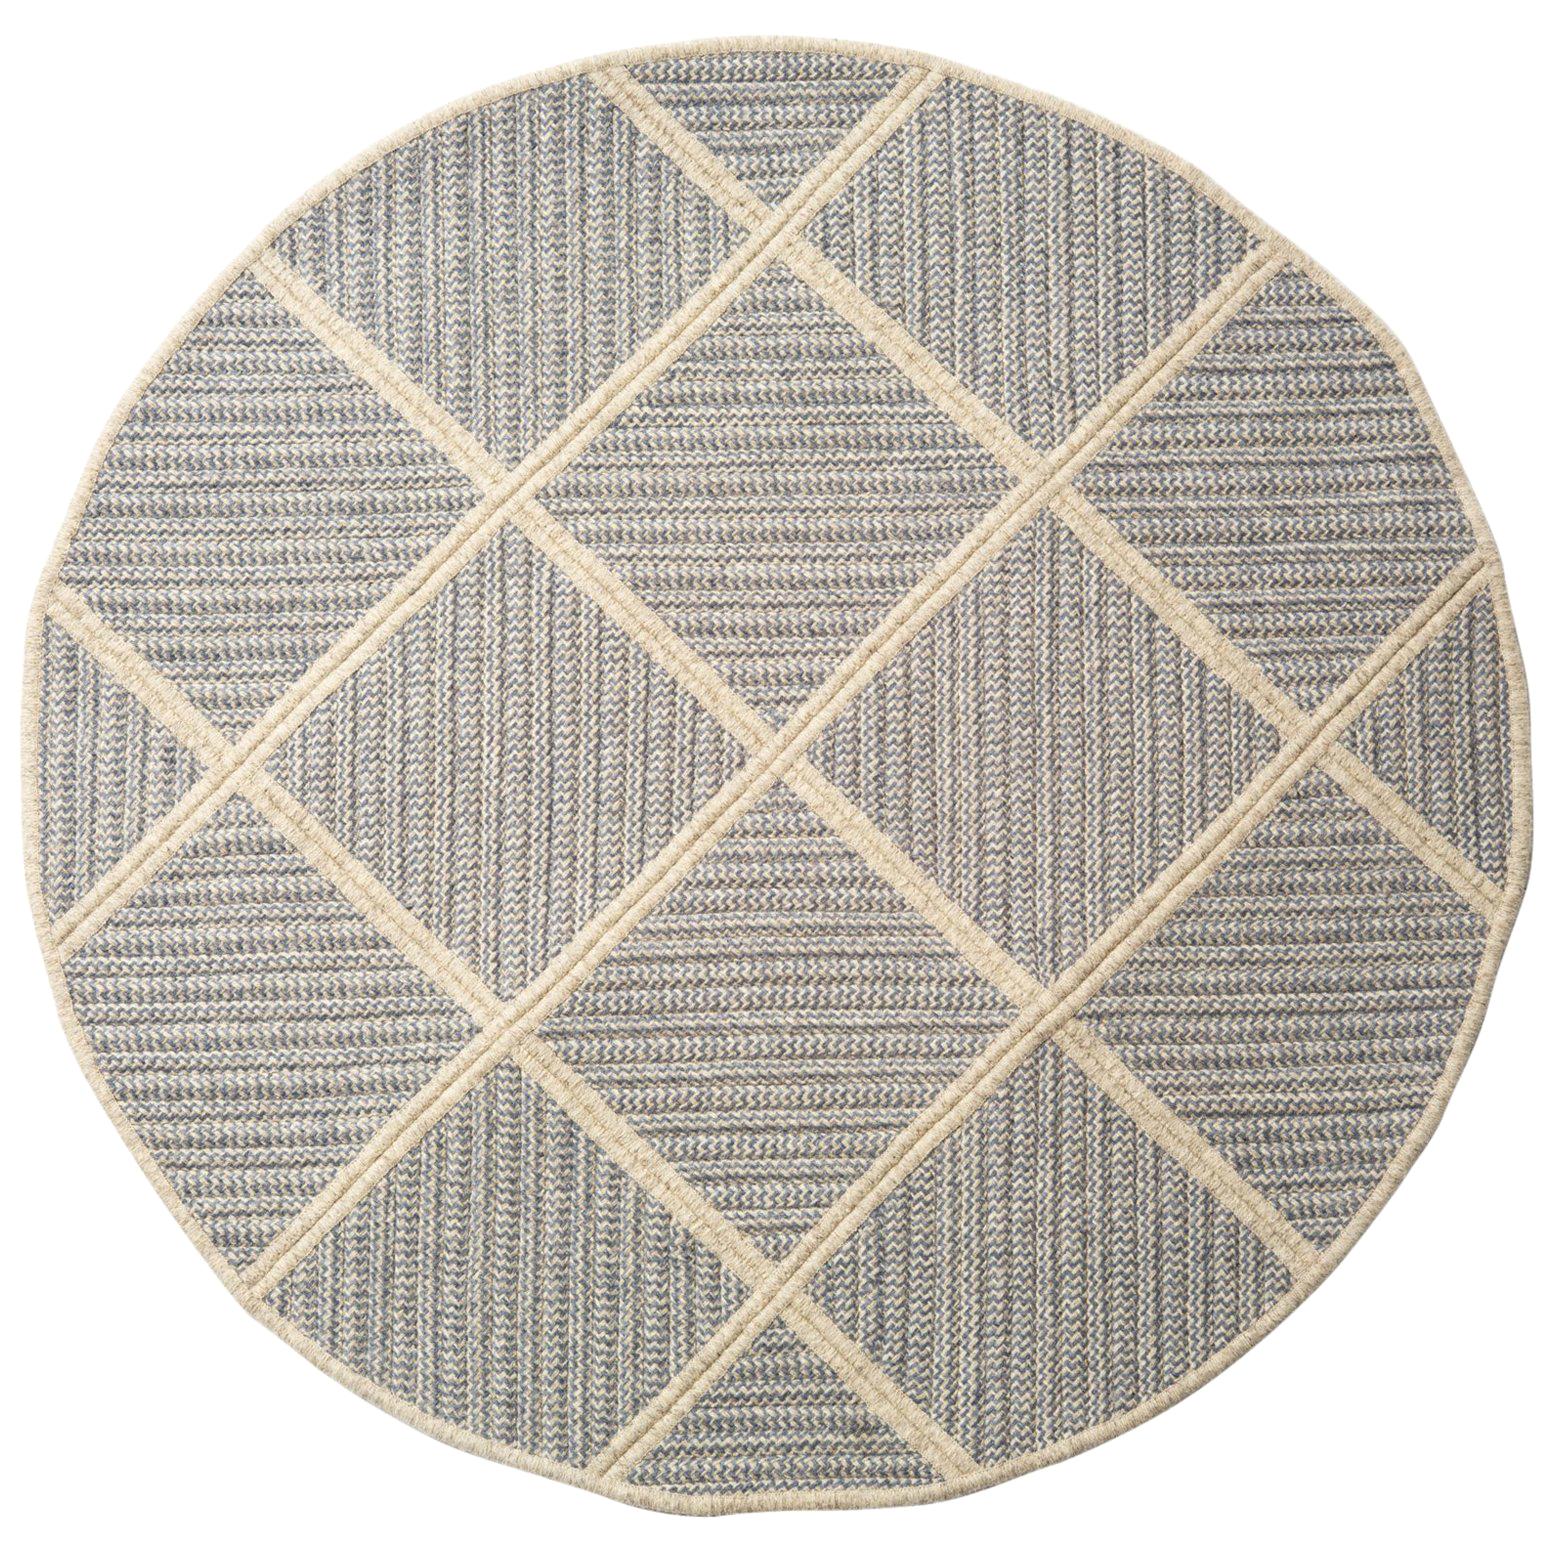 Terrain Rug, Blue and Grey Braided Woven Wool, Custom Made in the USA, Round For Sale